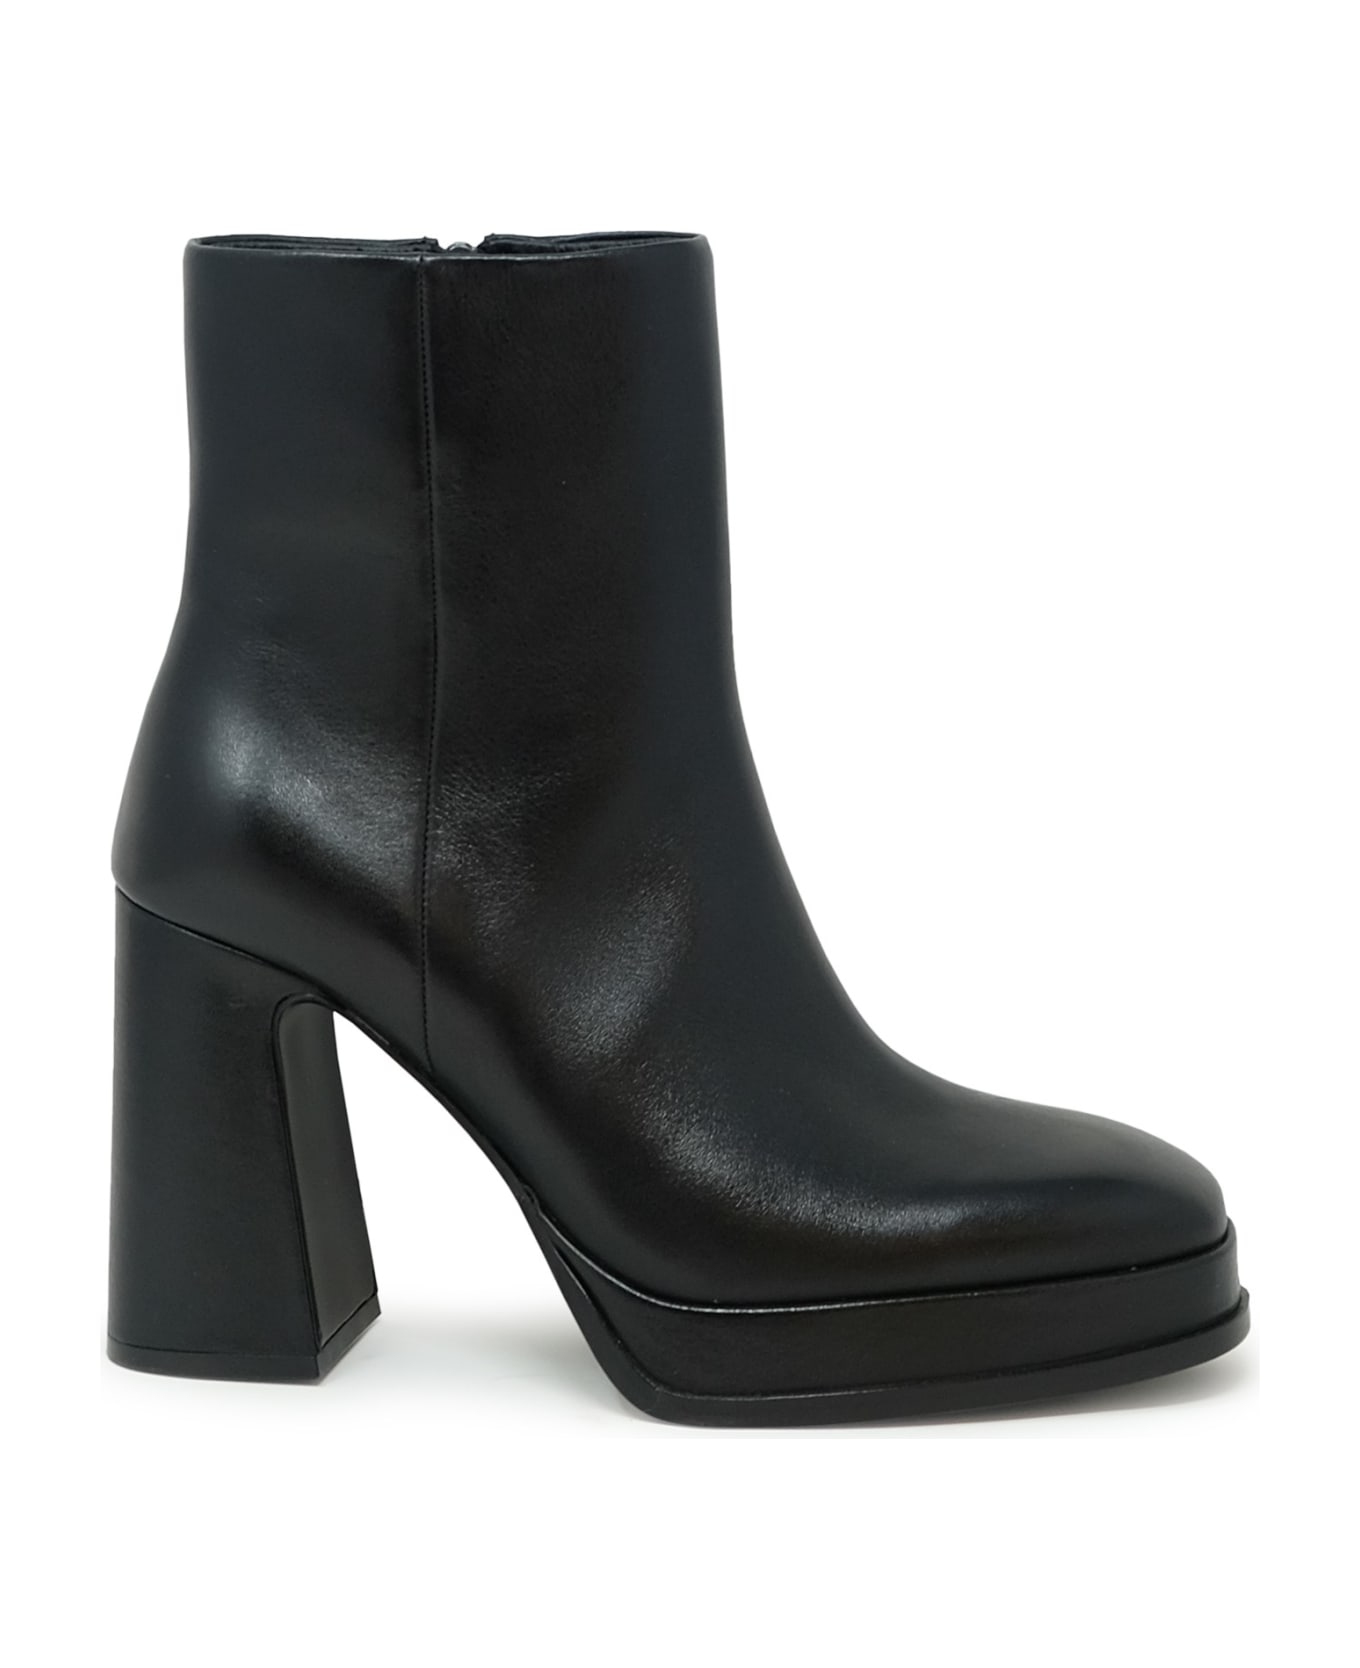 Ash Black Leather Ankle Boots ブーツ